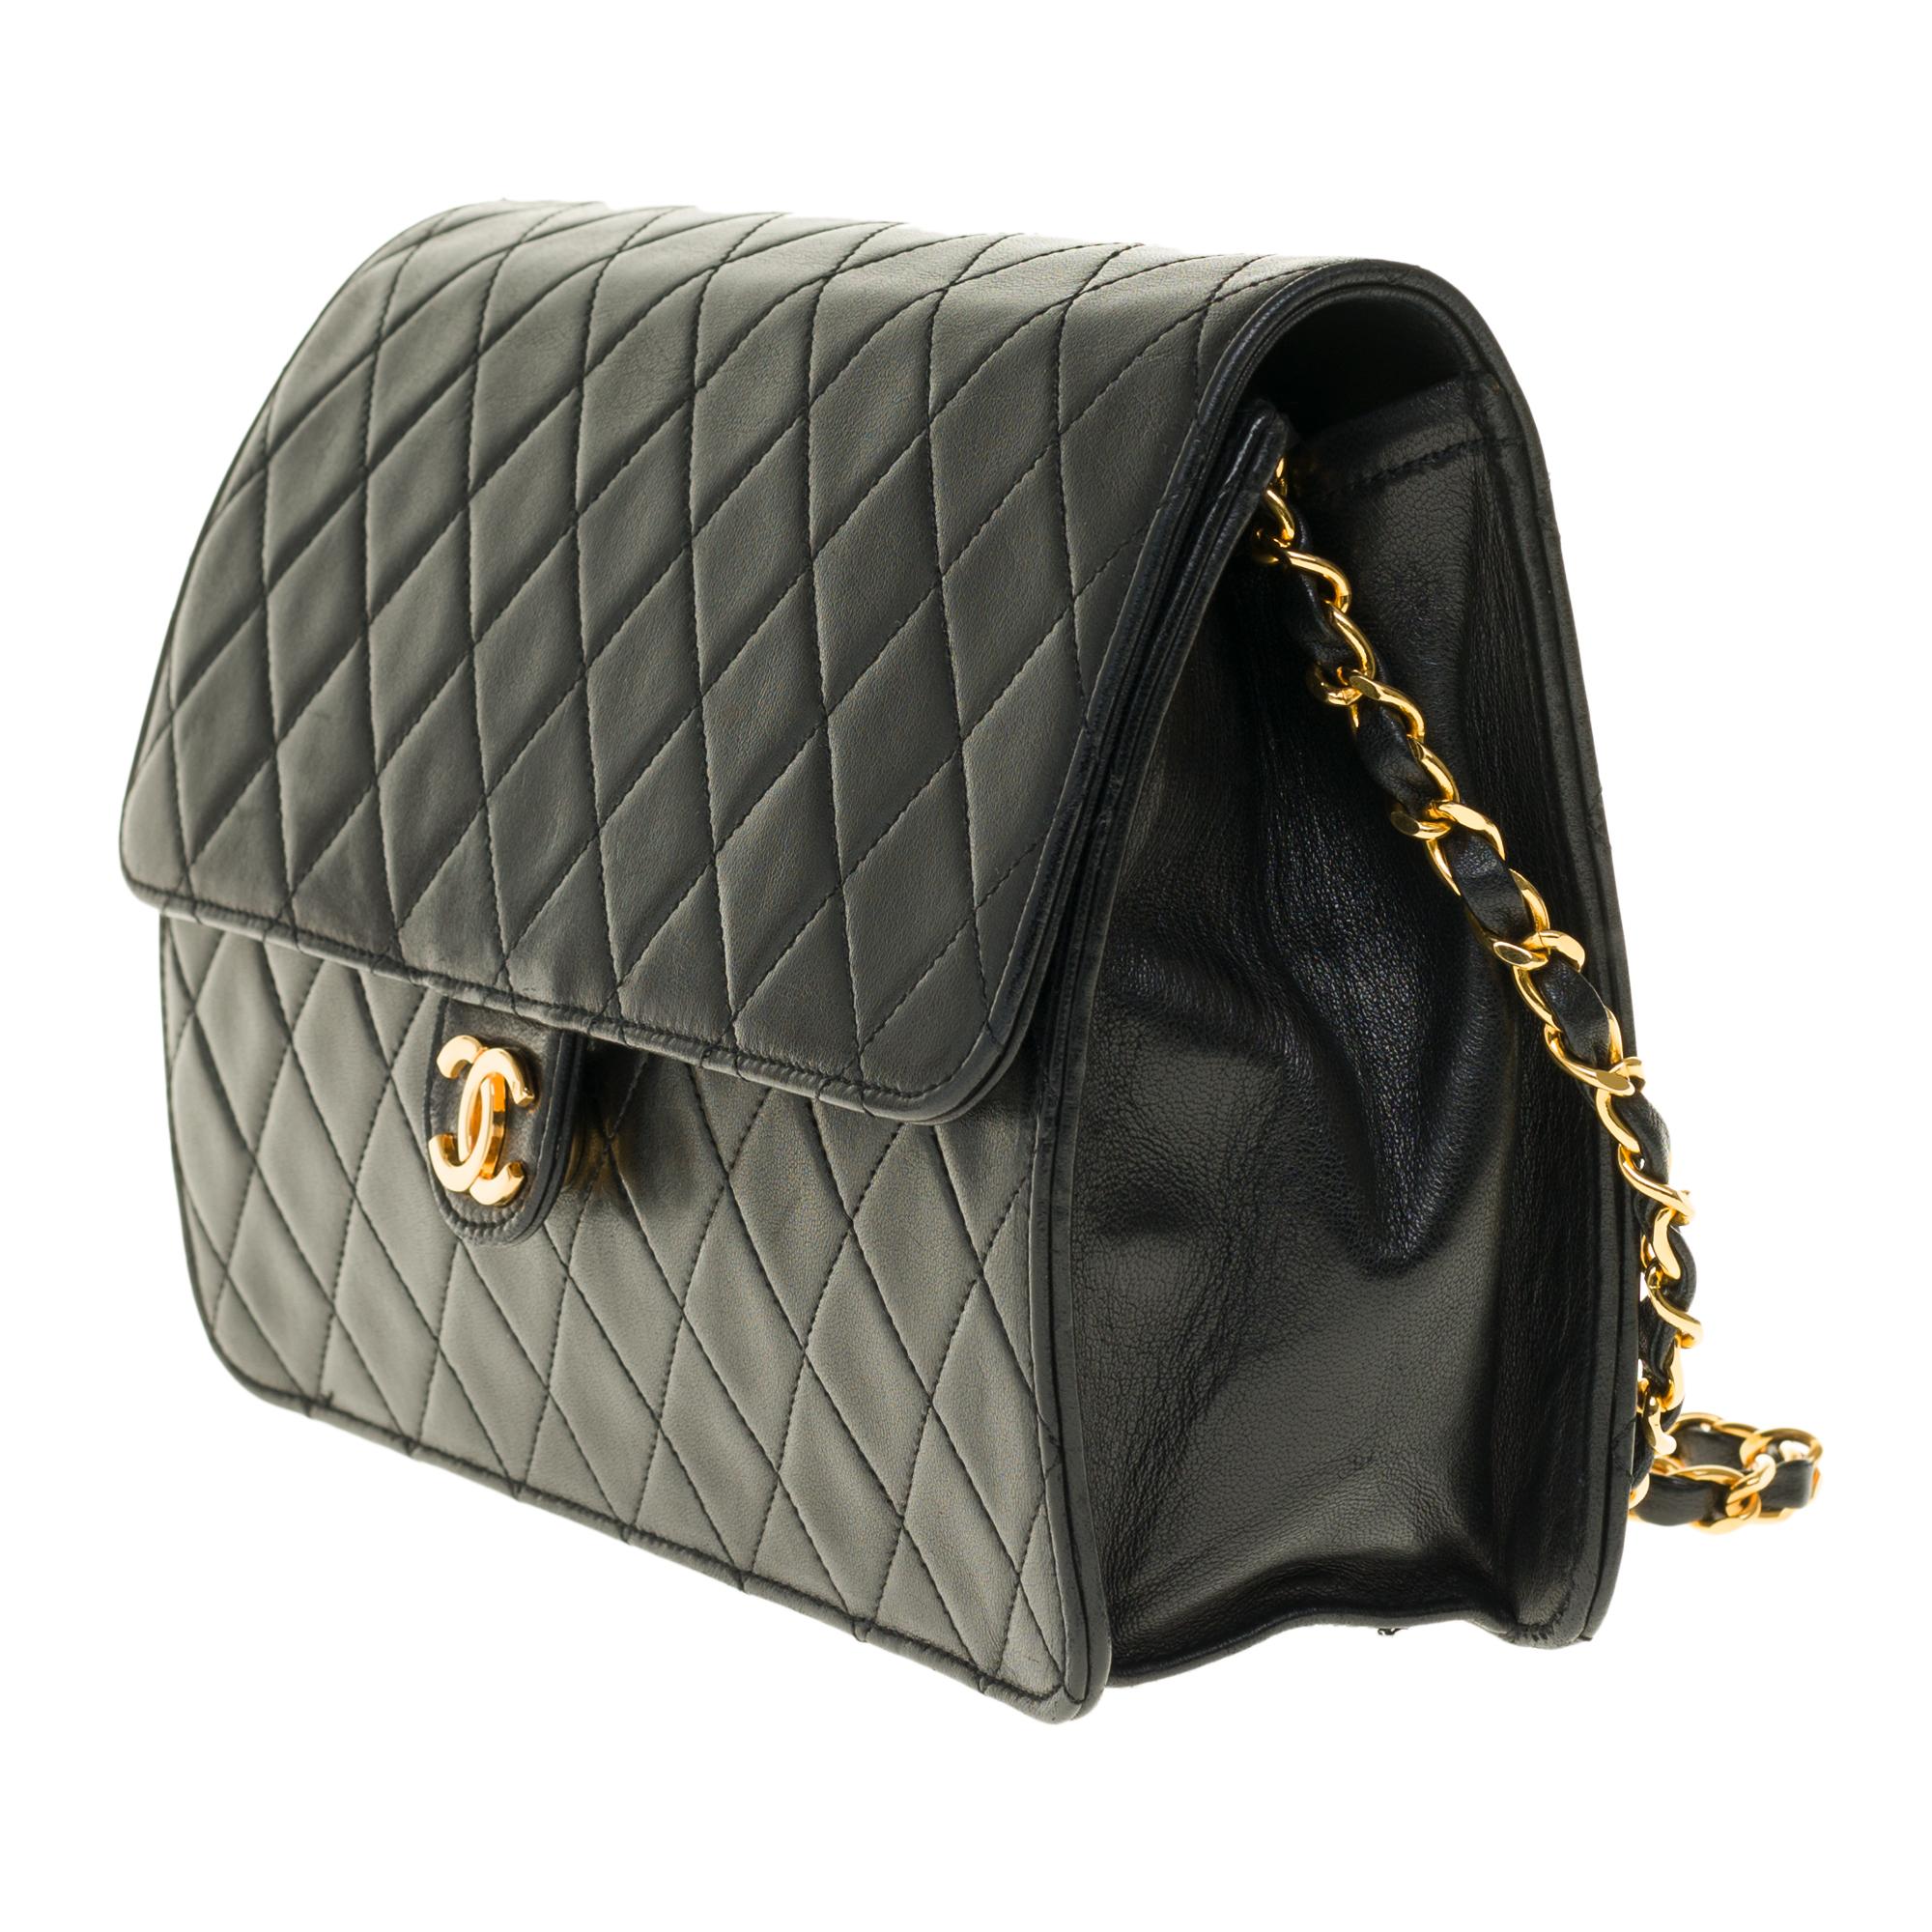 Black Stunning Chanel Classic shoulder bag in black quilted lambskin and gold hardware